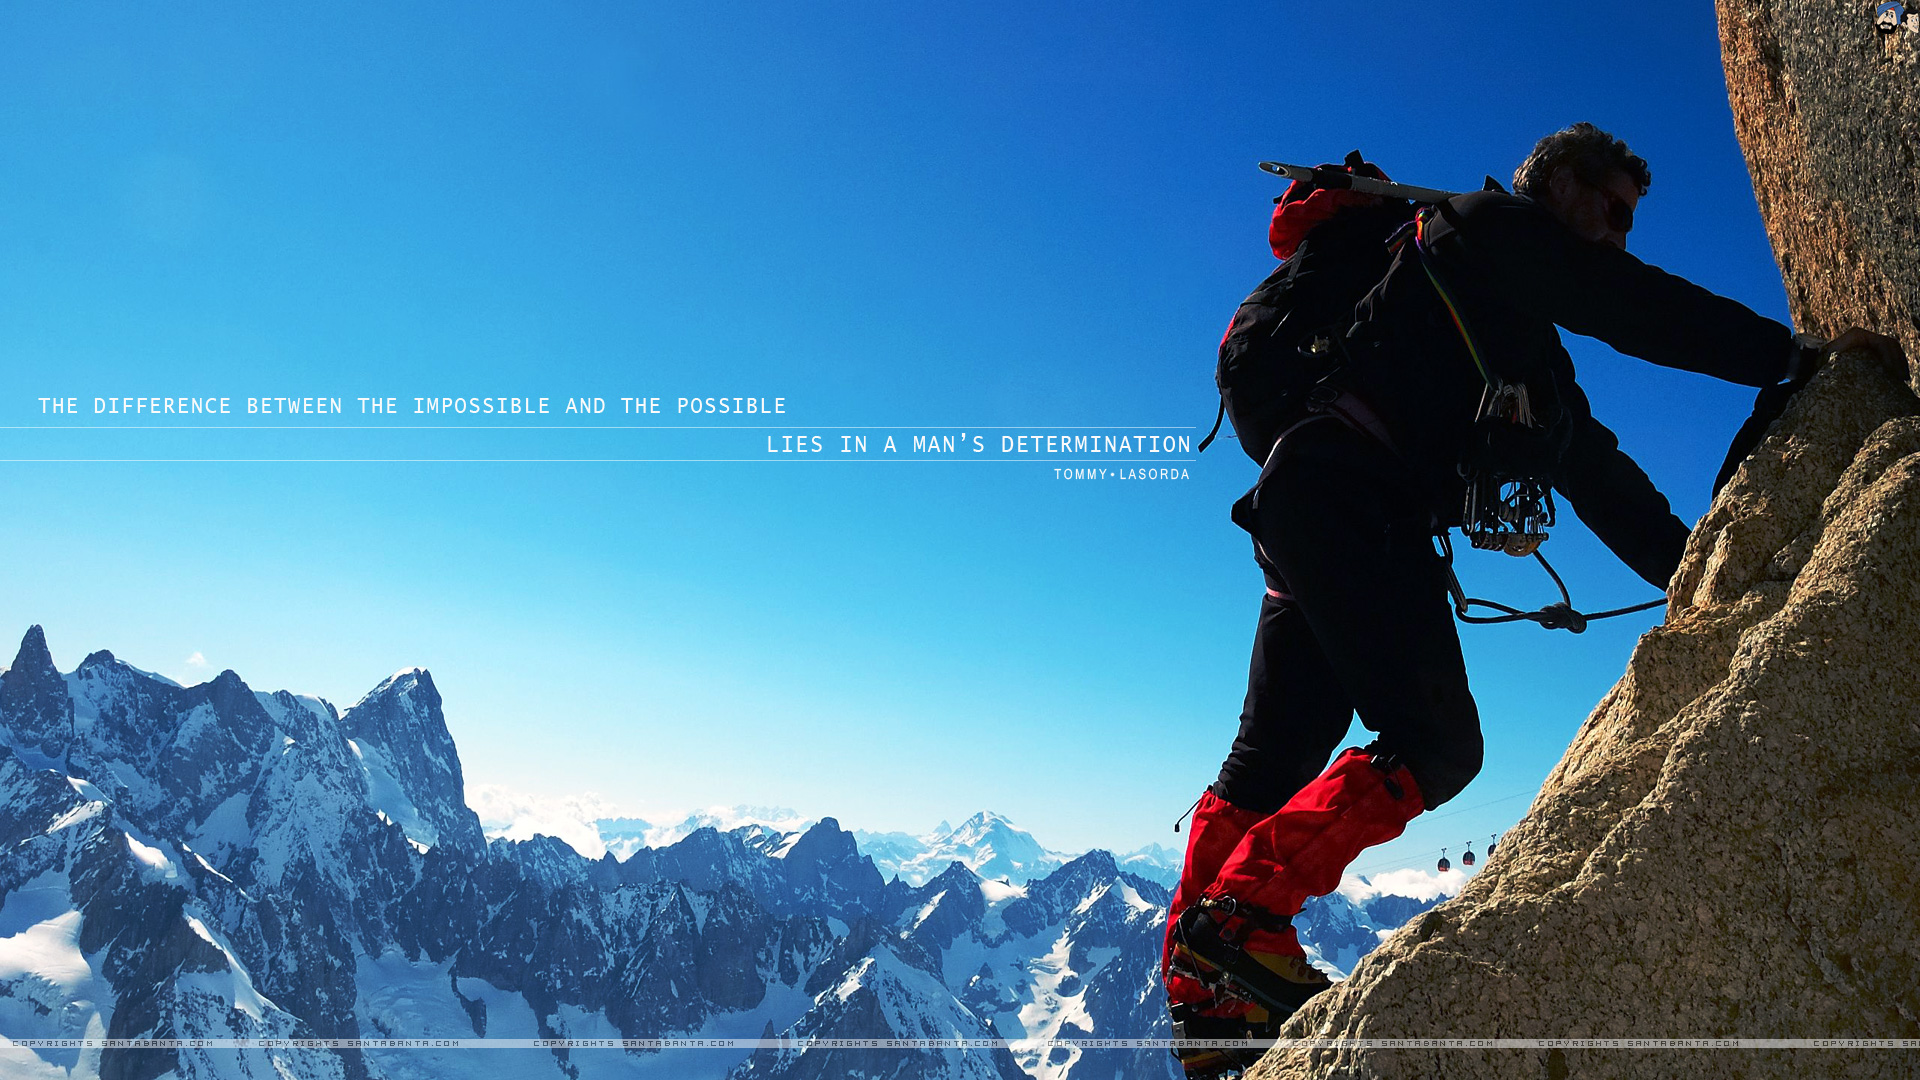 50 Motivational Wallpapers To Fire You Up For Big Things